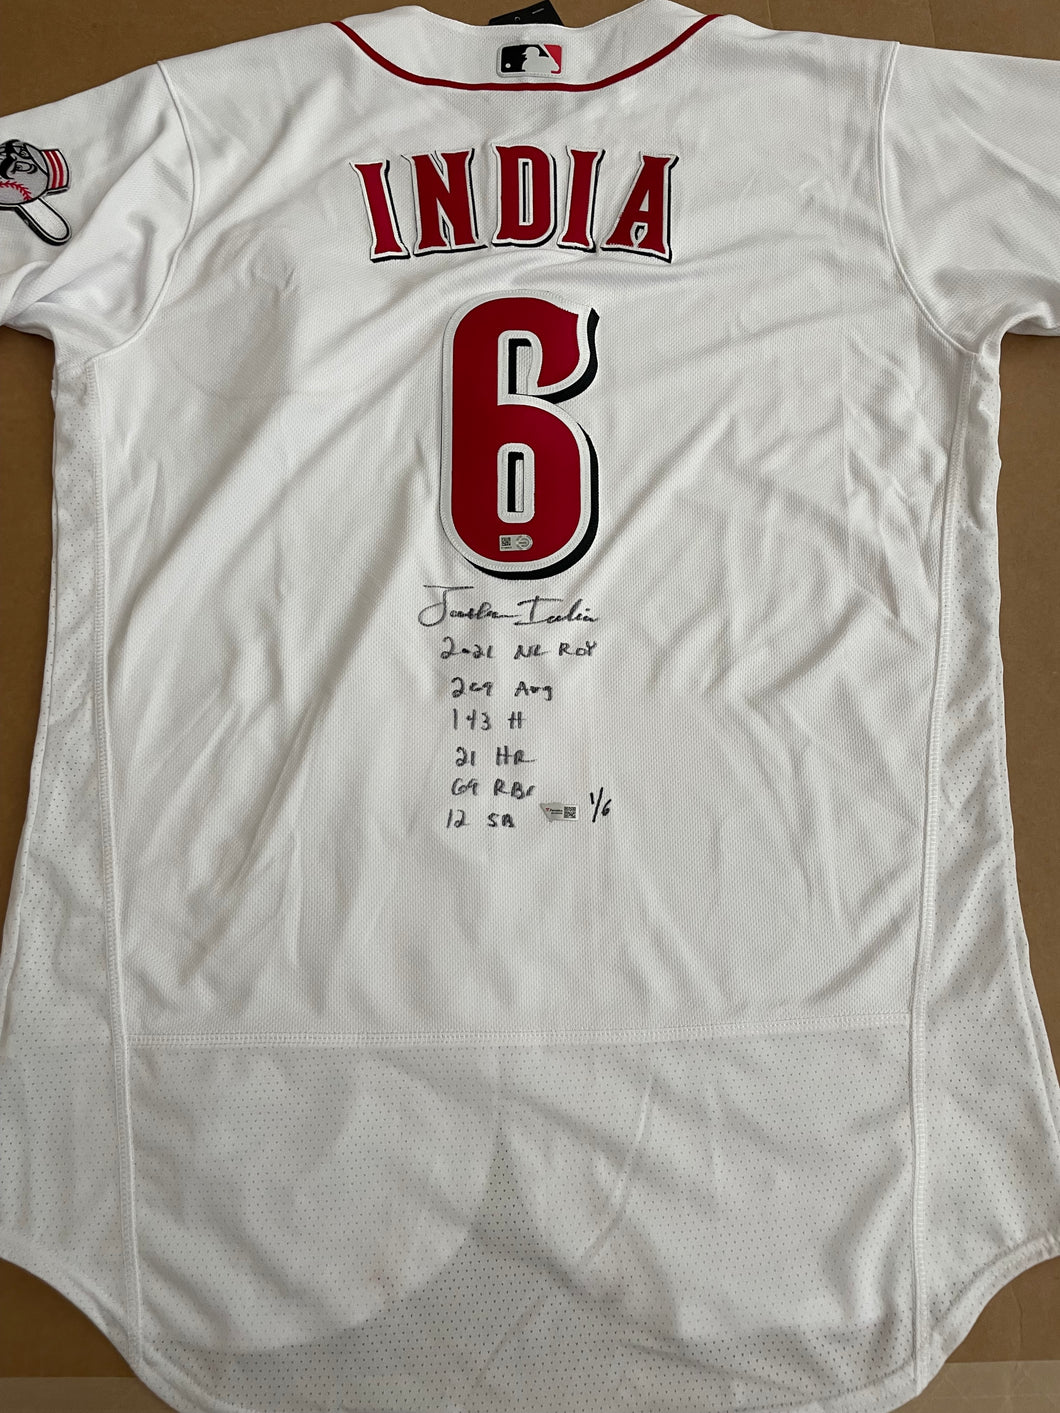 Jonathan India LE Cinn Reds Autographed White Nike Authentic Jersey w/ 2021 stats LE 1/6